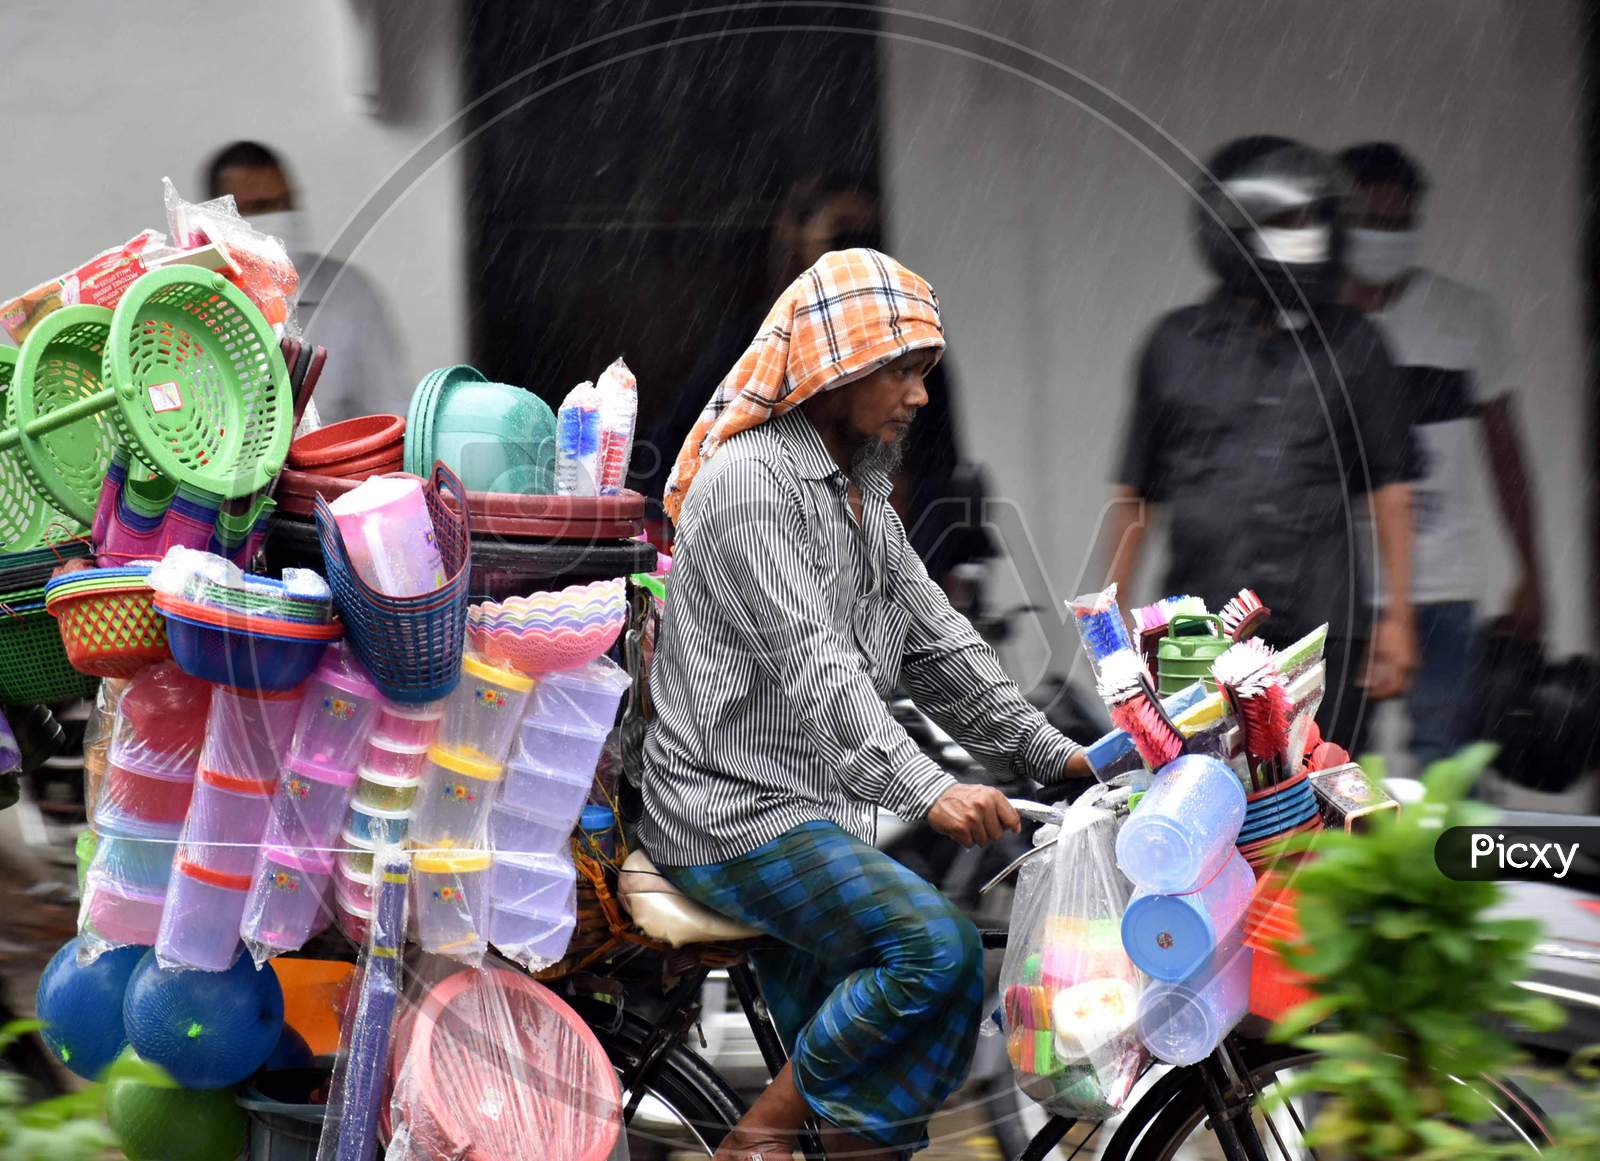 A vendor cycles on the road during heavy rains in Prayagraj, August 12, 2020.